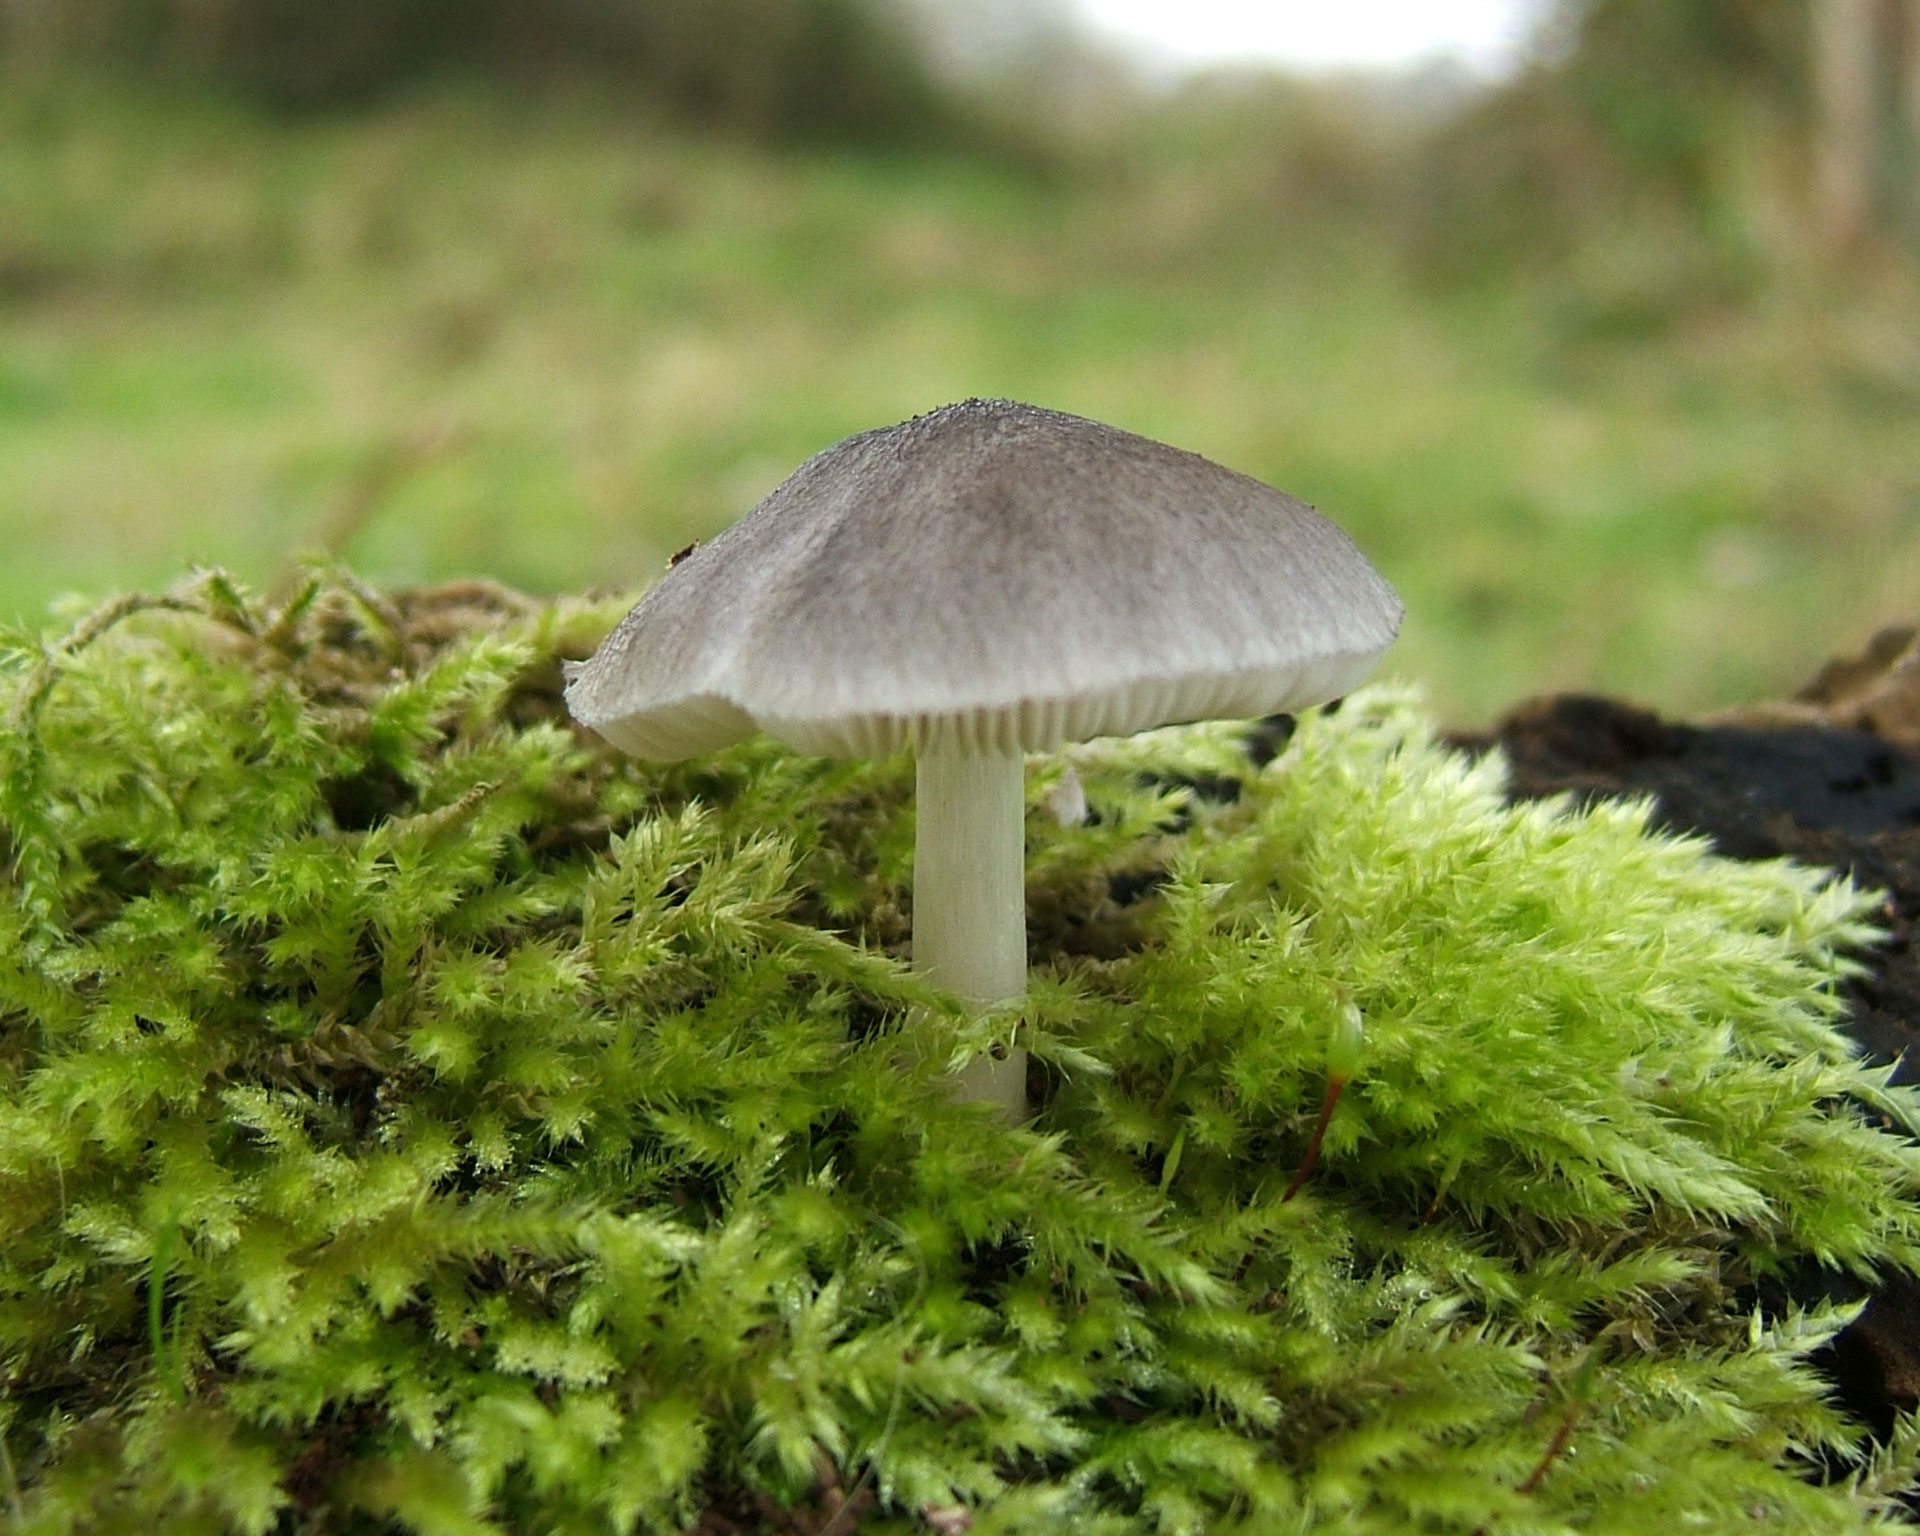 a small mushroom grows on the moss in a clearing